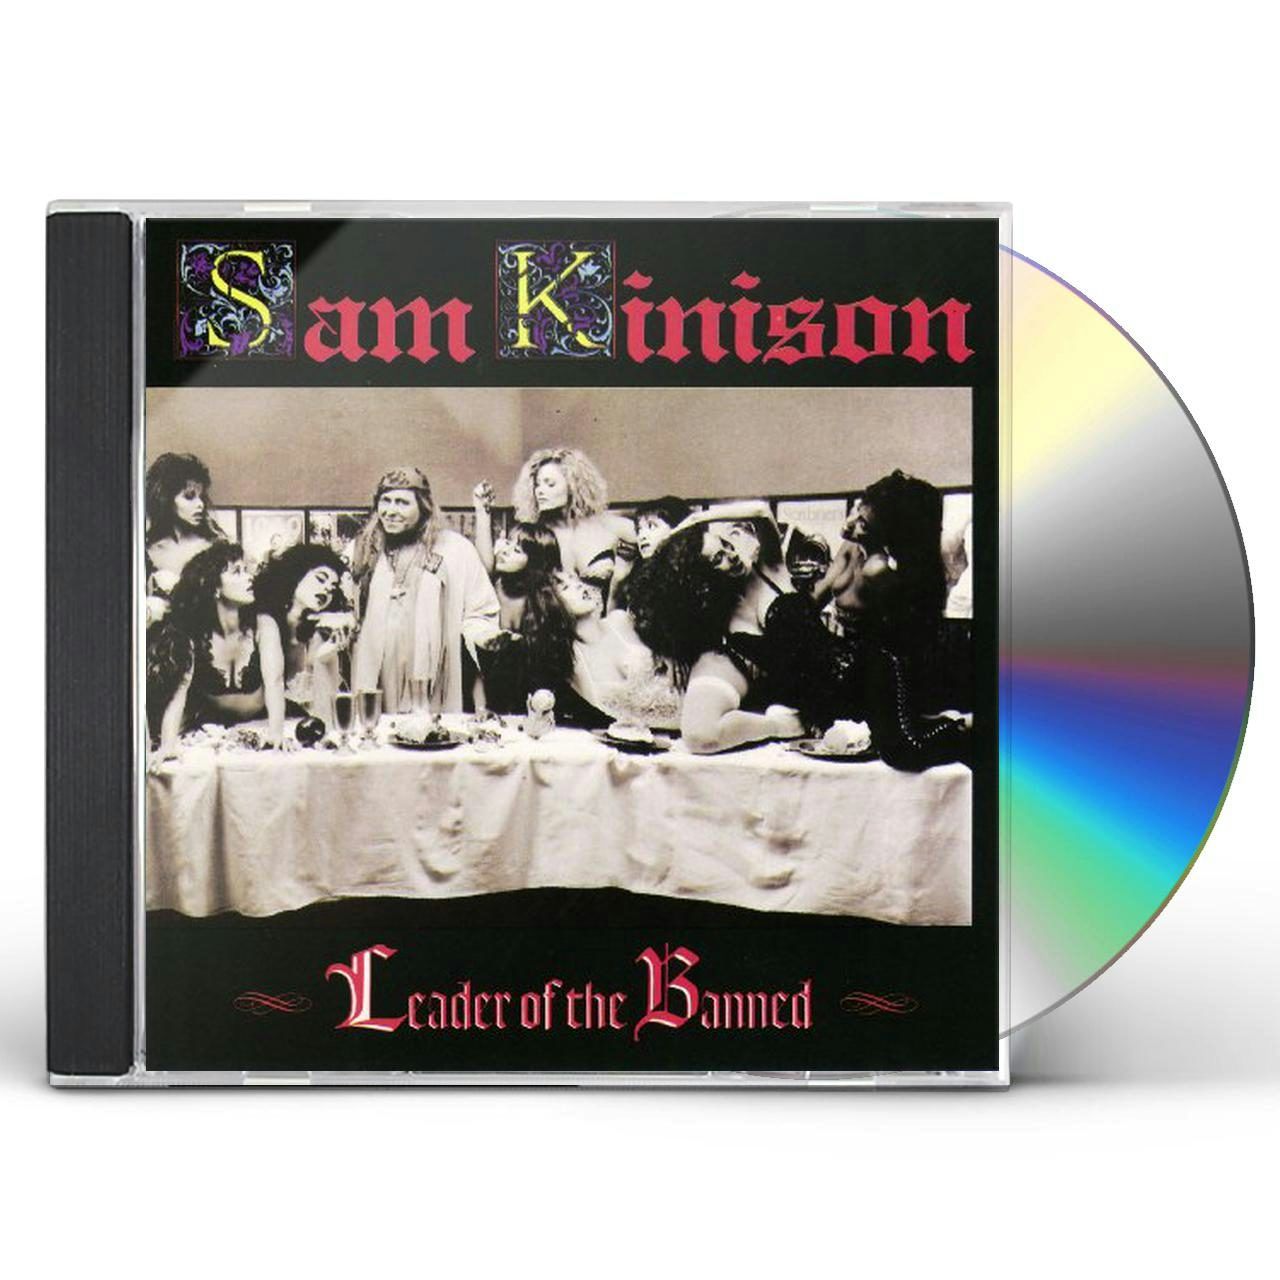 Sam Kinison LEADER OF THE BANNED CD